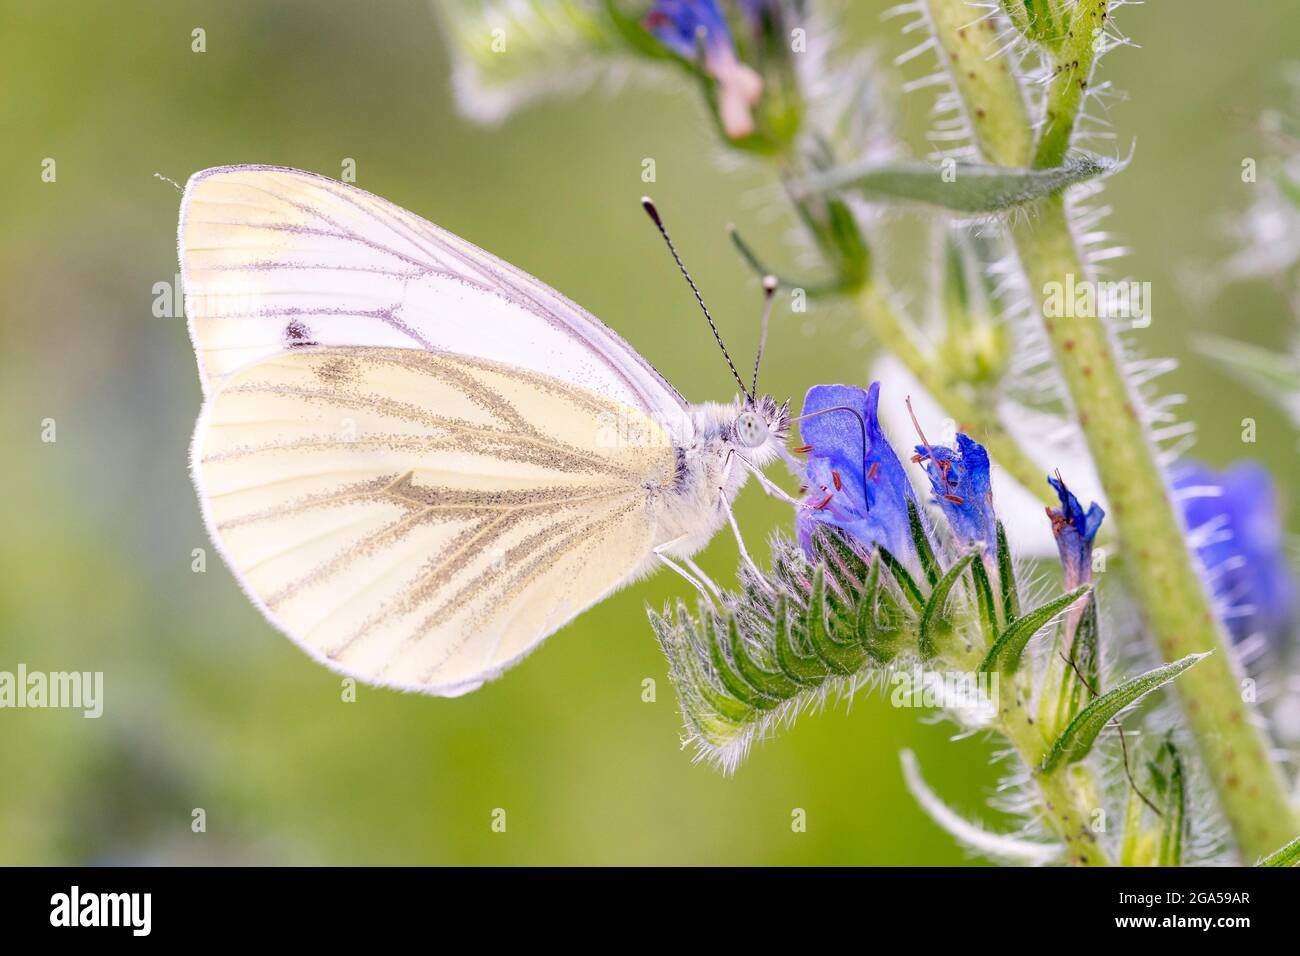 Green-veined white Butterfly - Pieris napi - resting on a blossom of viper's bugloss or blueweed - Echium vulgare Stock Photo